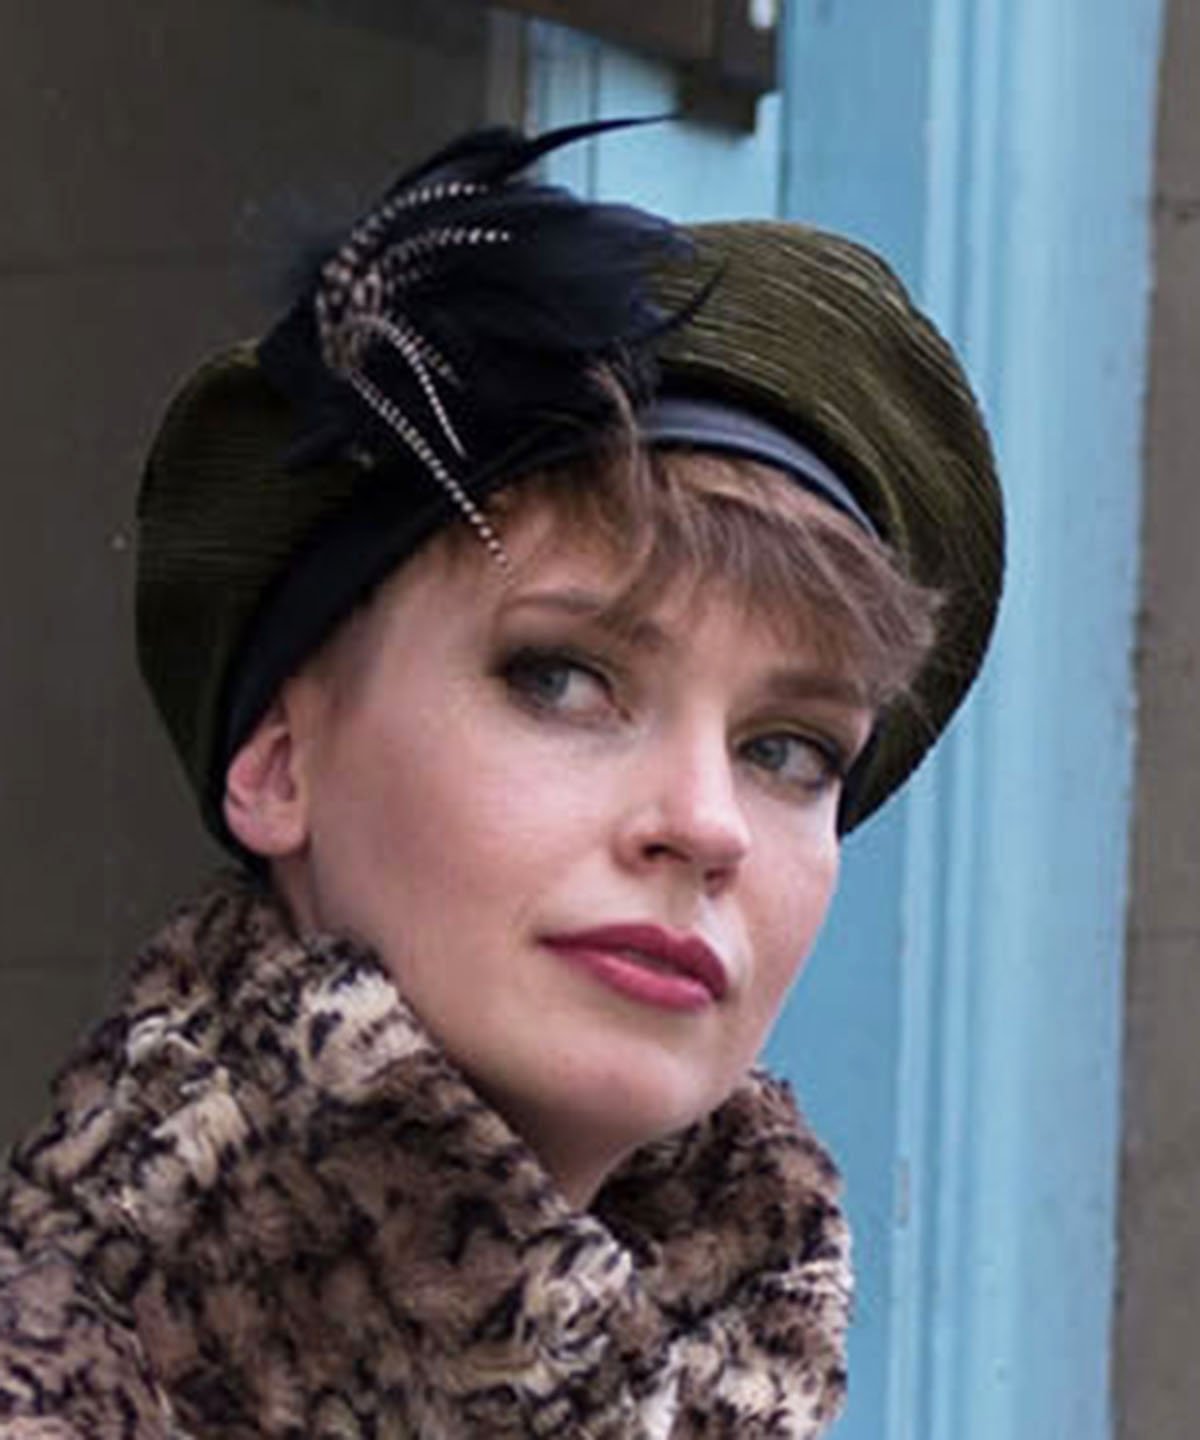 Beret, Reversible - Cohen Upholstery (Feather Trim - Limited Availability)